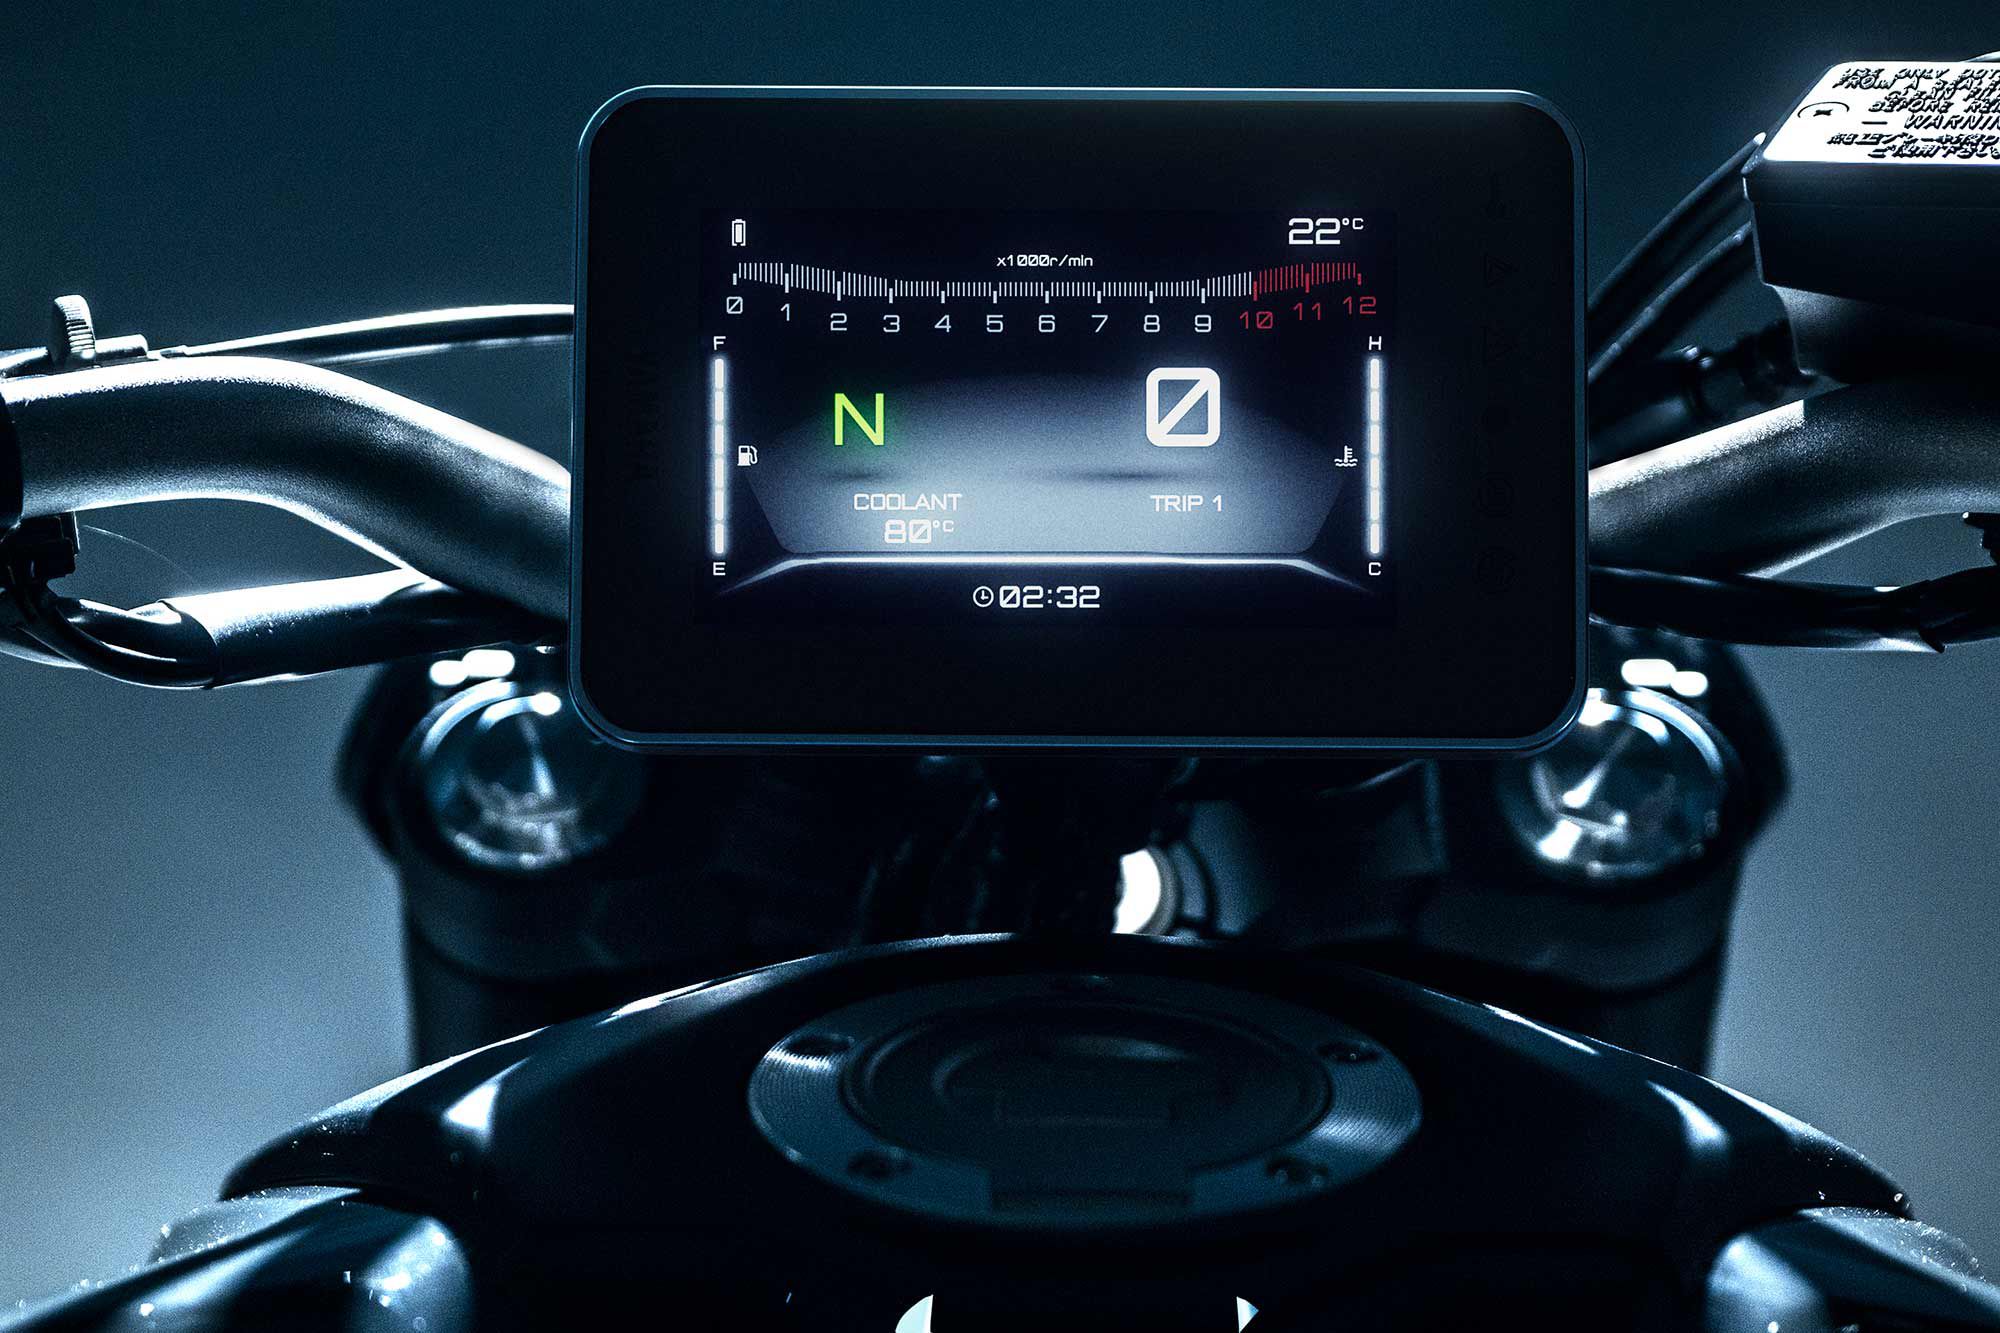 The 2023 Yamaha MT-07 gets a brand new instrument panel.